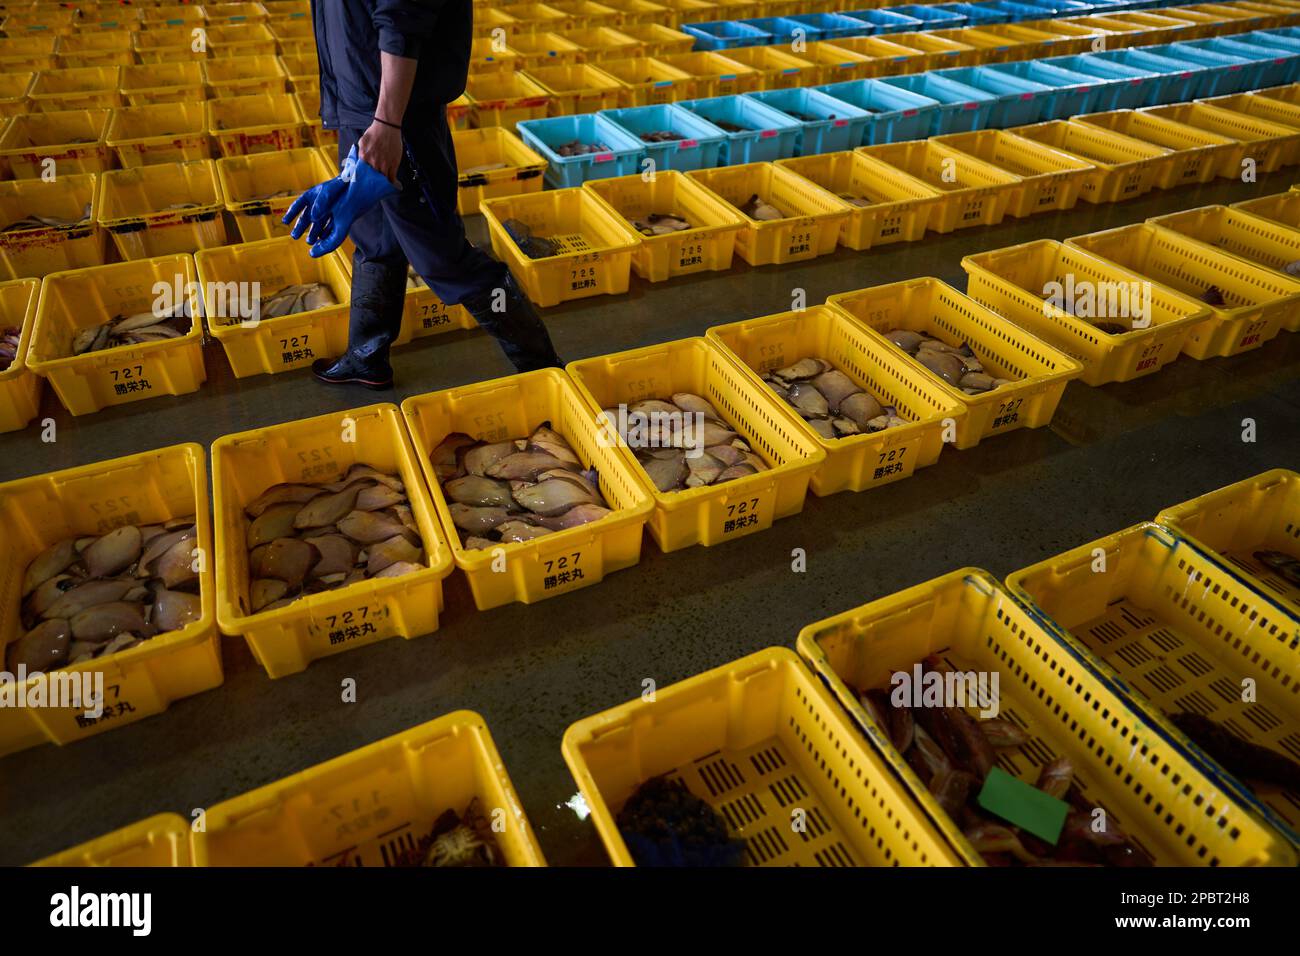 (230313) -- FUKUSHIMA, March 13, 2023 (Xinhua) -- This photo taken on March 8, 2023 shows freshly caught fish at a fish market in Soma City, Fukushima Prefecture, Japan. Struck by a magnitude-9.0 earthquake and ensuing tsunami that hit Japan's northeast on March 11, 2011, the power plant suffered core meltdowns, resulting in a level-7 nuclear accident, the highest on the International Nuclear and Radiological Event Scale. Twelve years after the 2011 accident traumatized Fukushima's fishing industry, local fishermen are still struggling for recovery. As Japan pushes ahead with dumping tons o Stock Photo